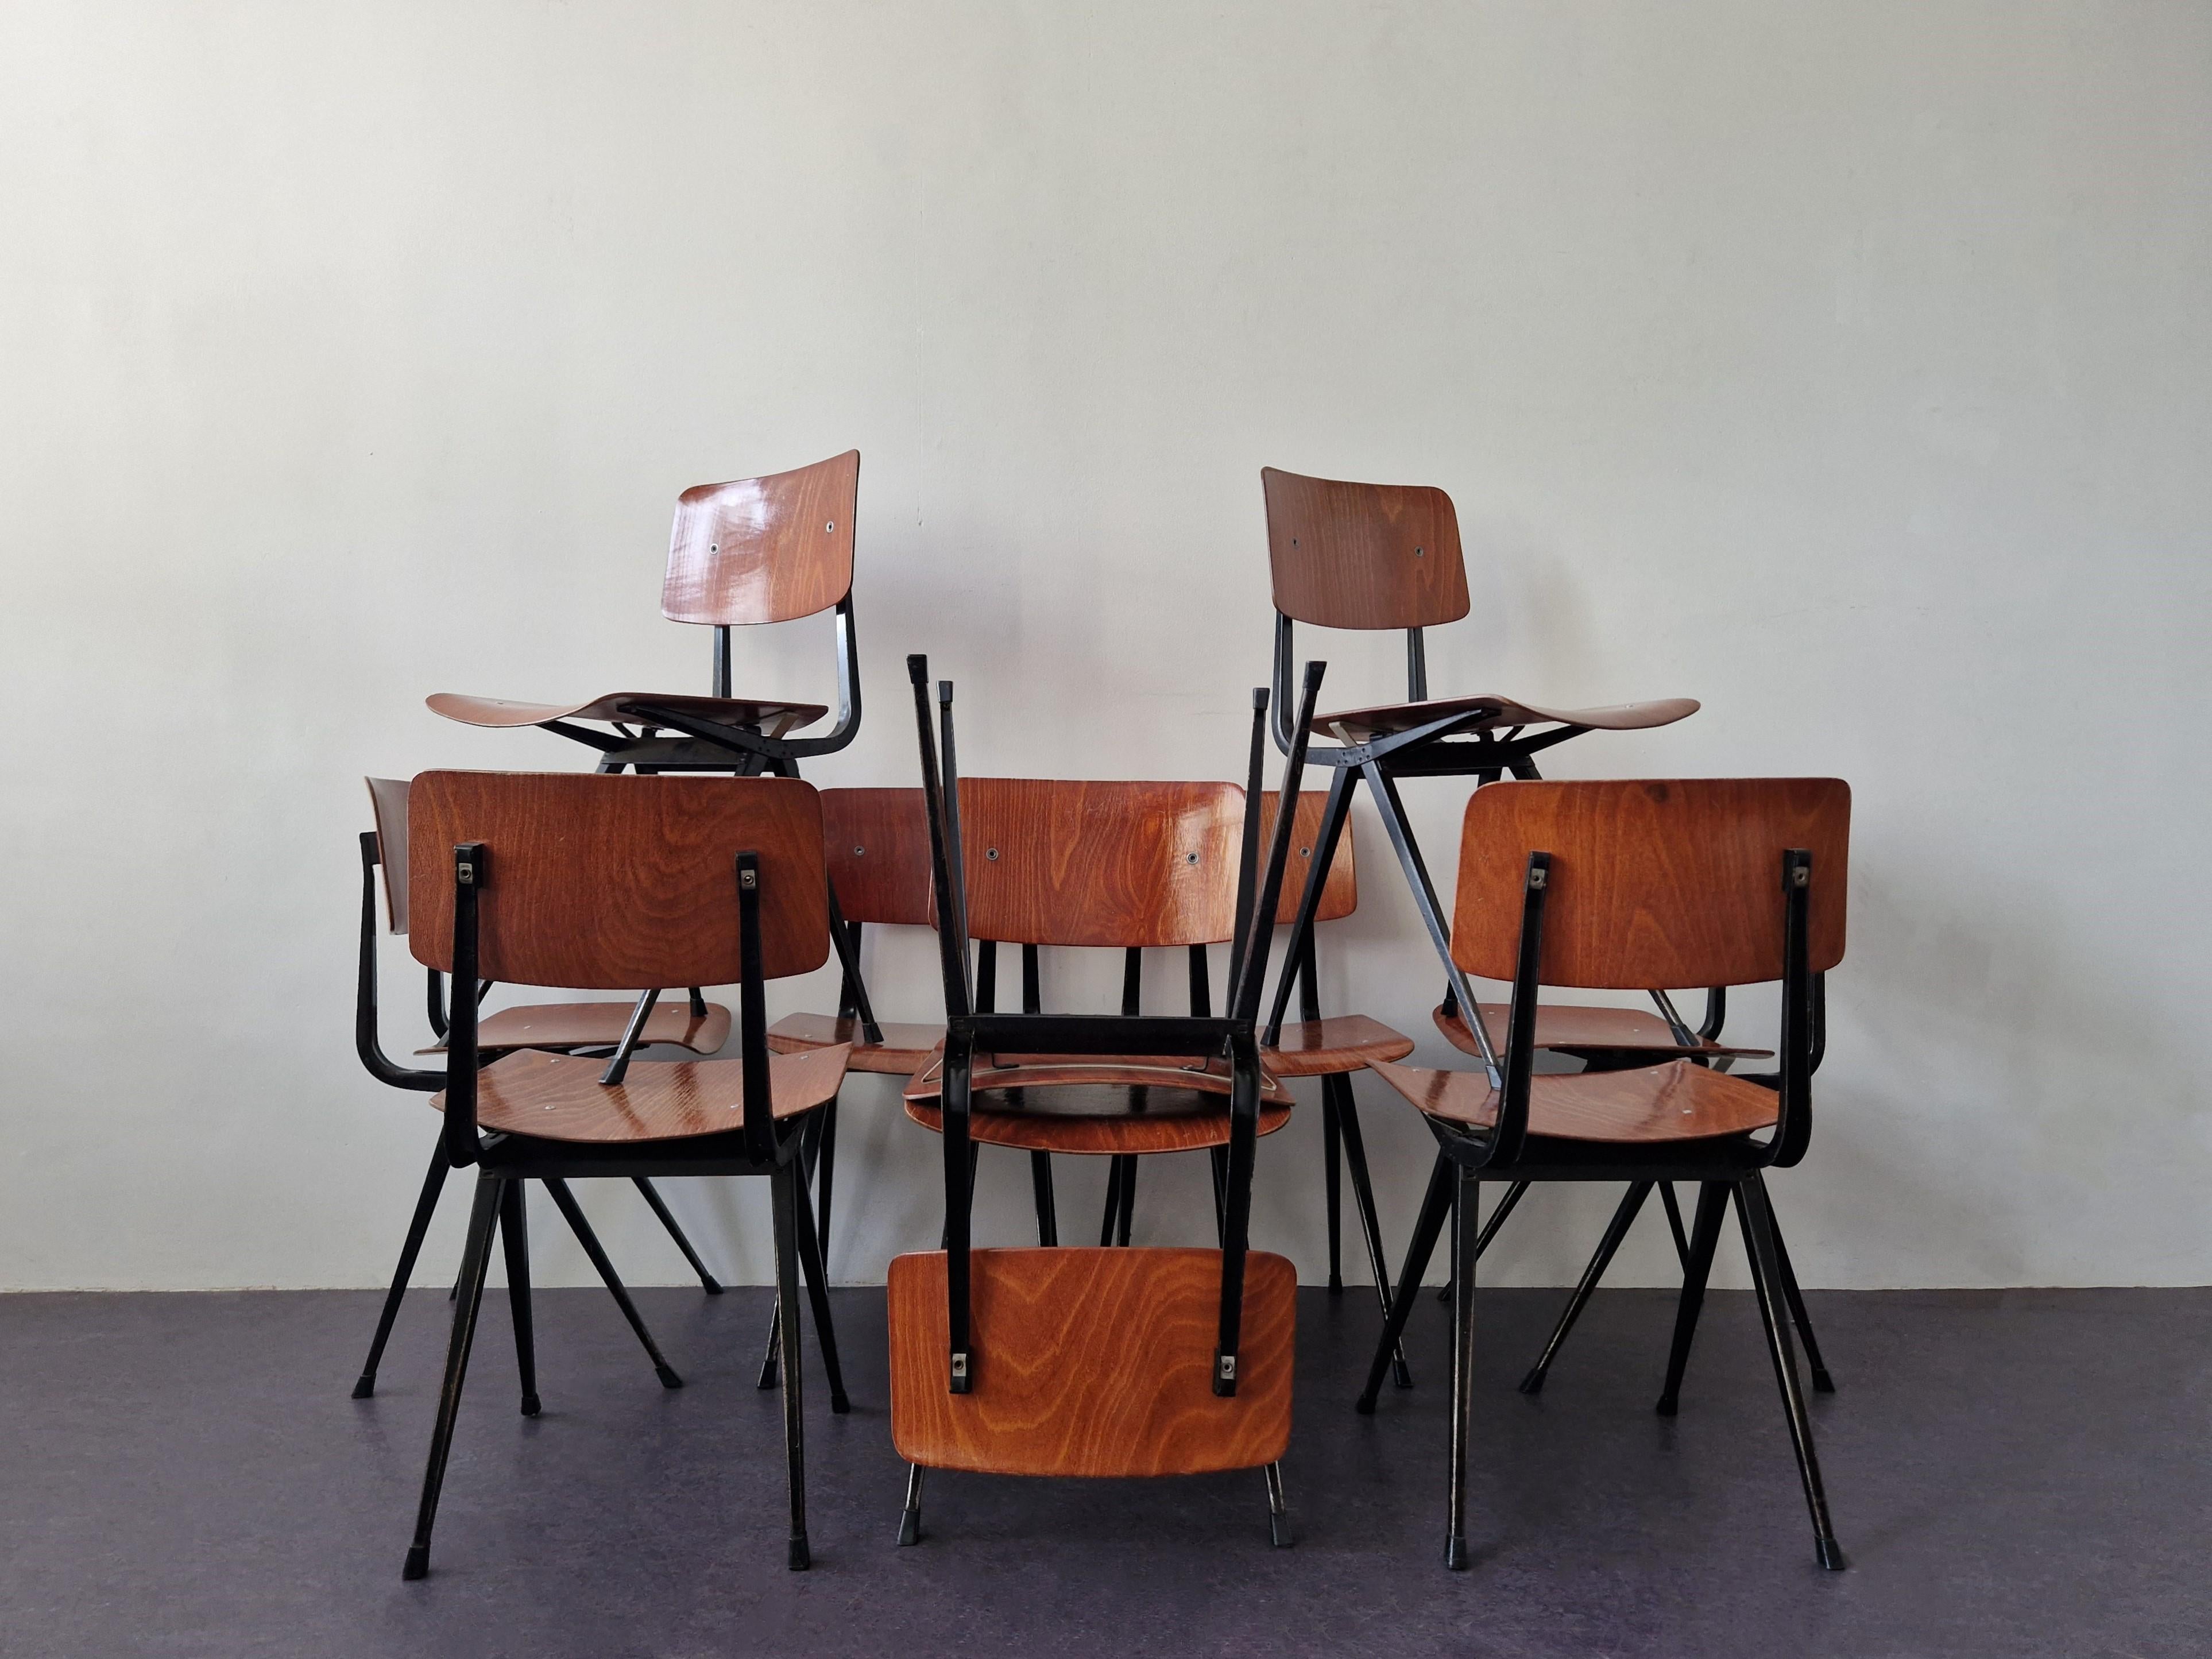 Dutch Set of 10 Result chairs by Friso Kramer for Ahrend de Cirkel, 1960's/1970's For Sale